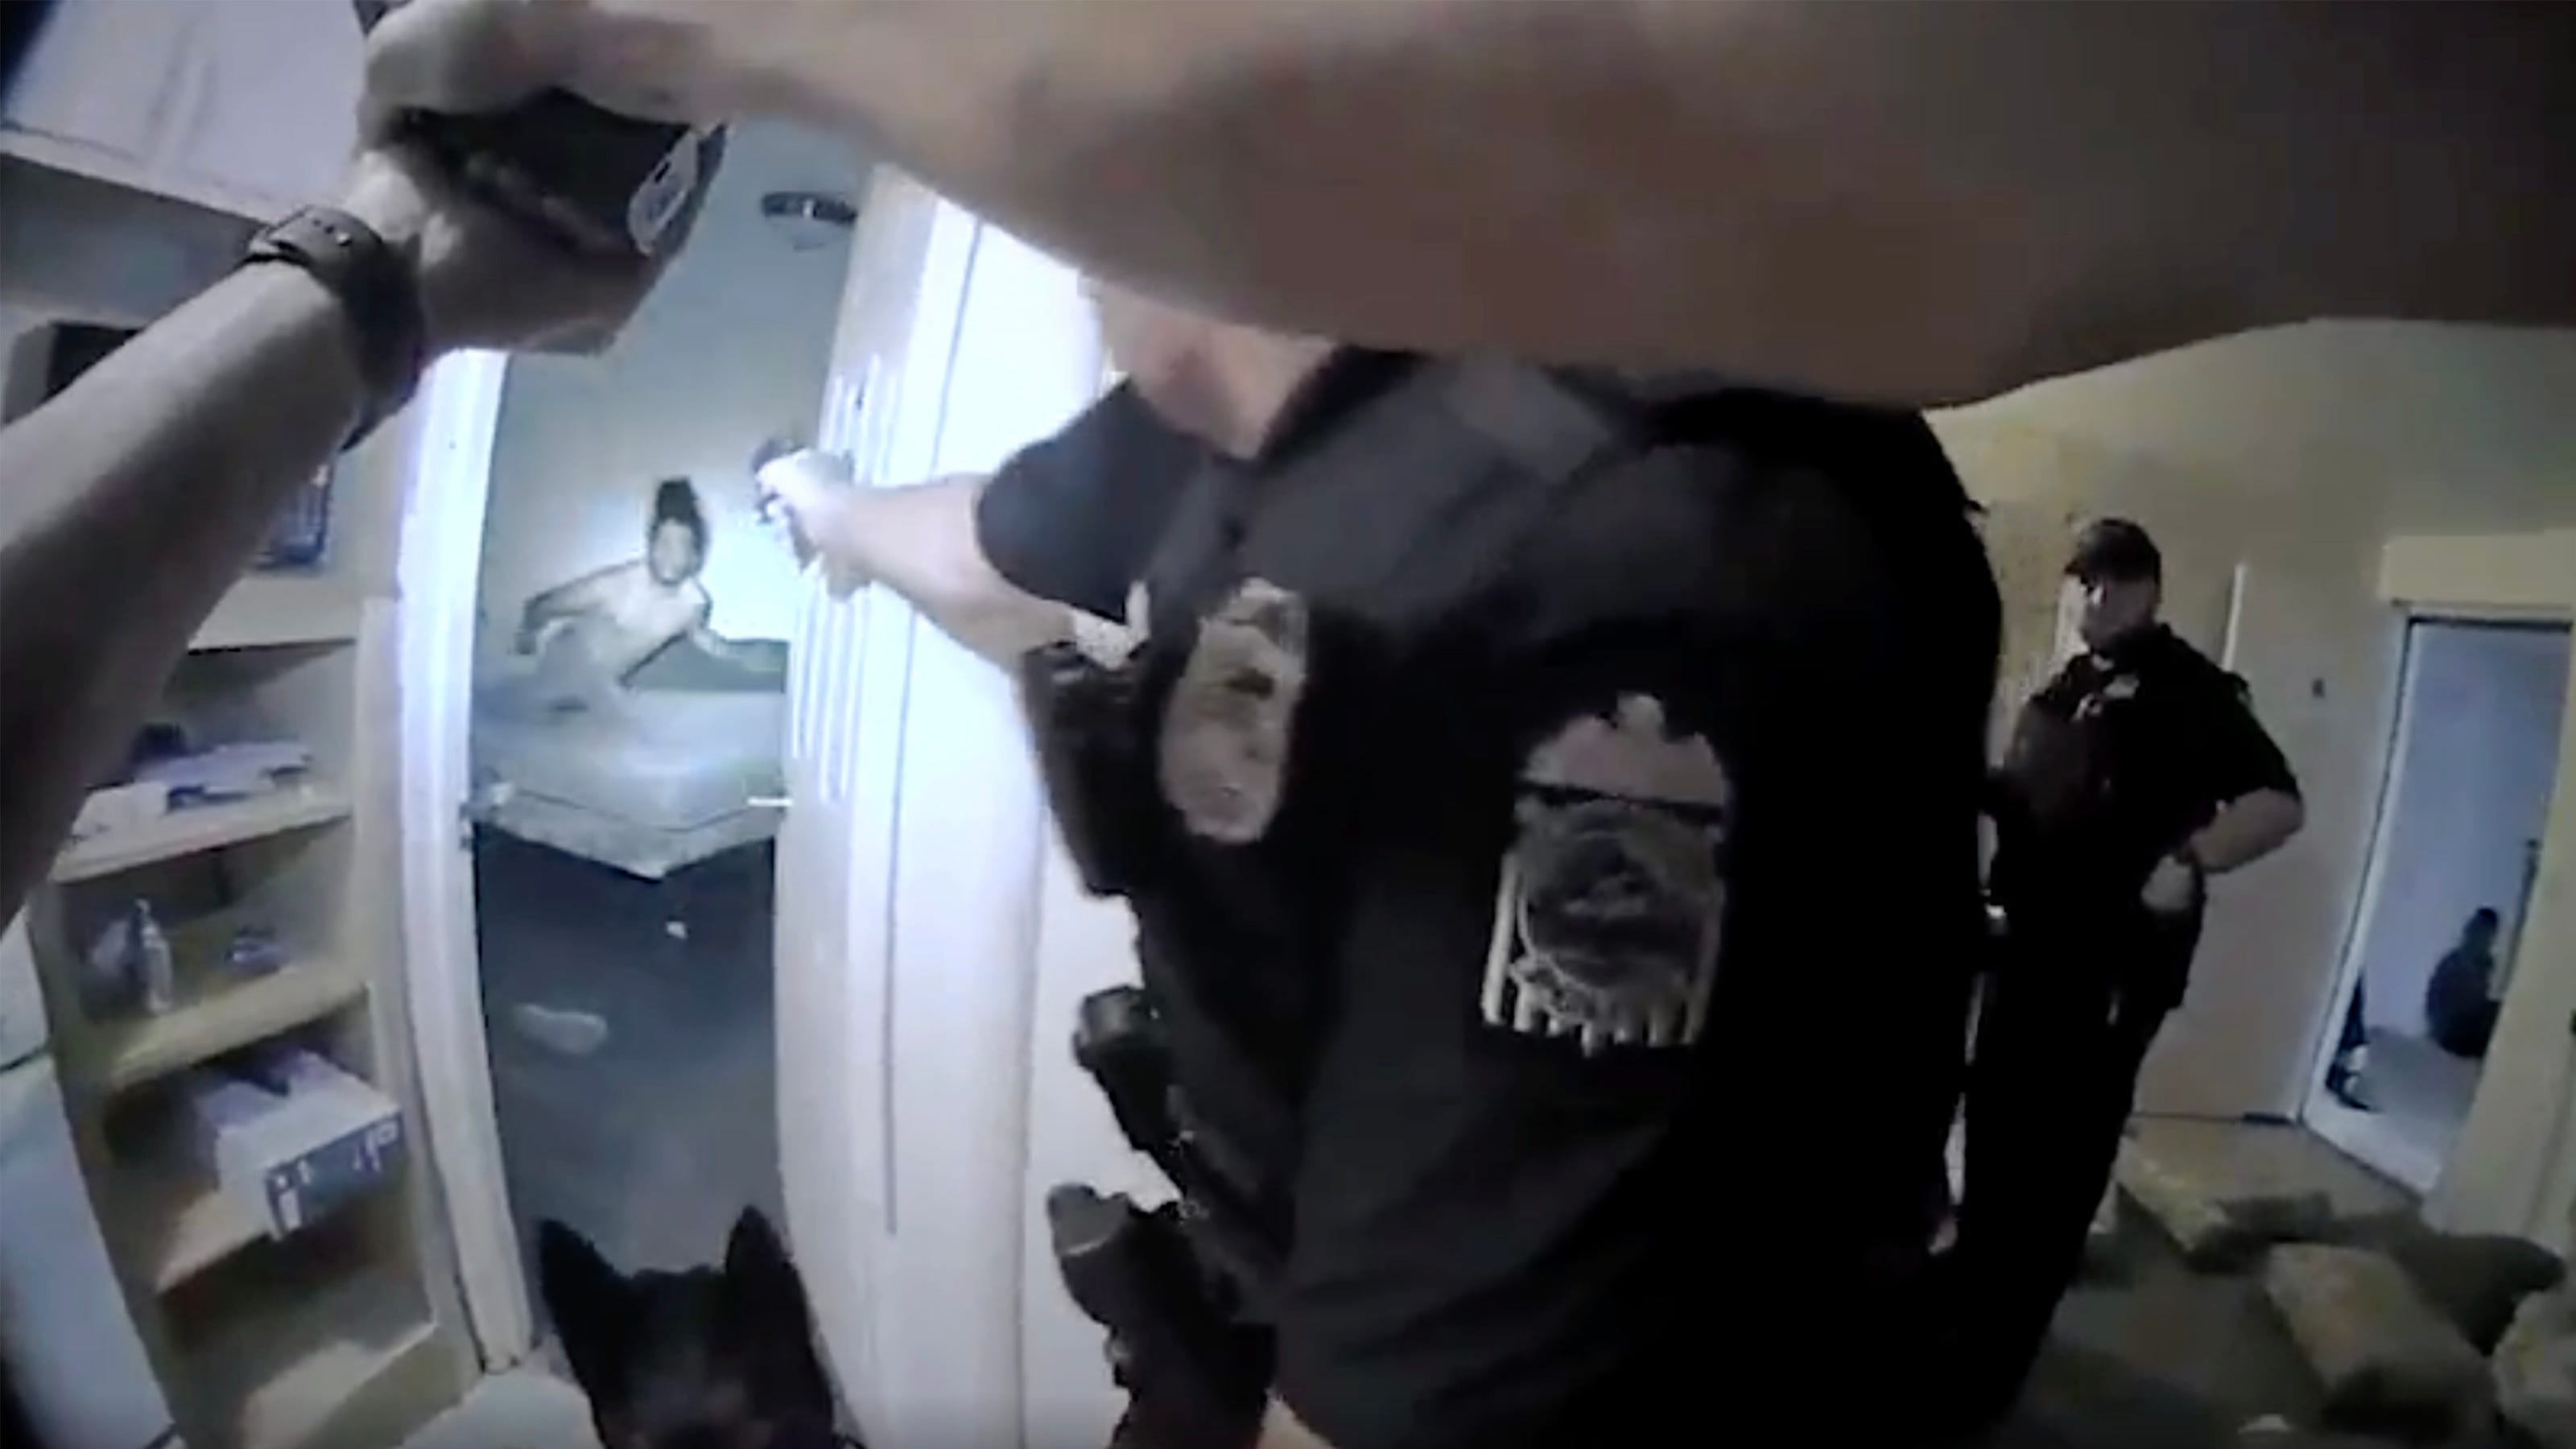 Ohio police fatally shoot unarmed Black man in bed during failed arrest attempt, video shows